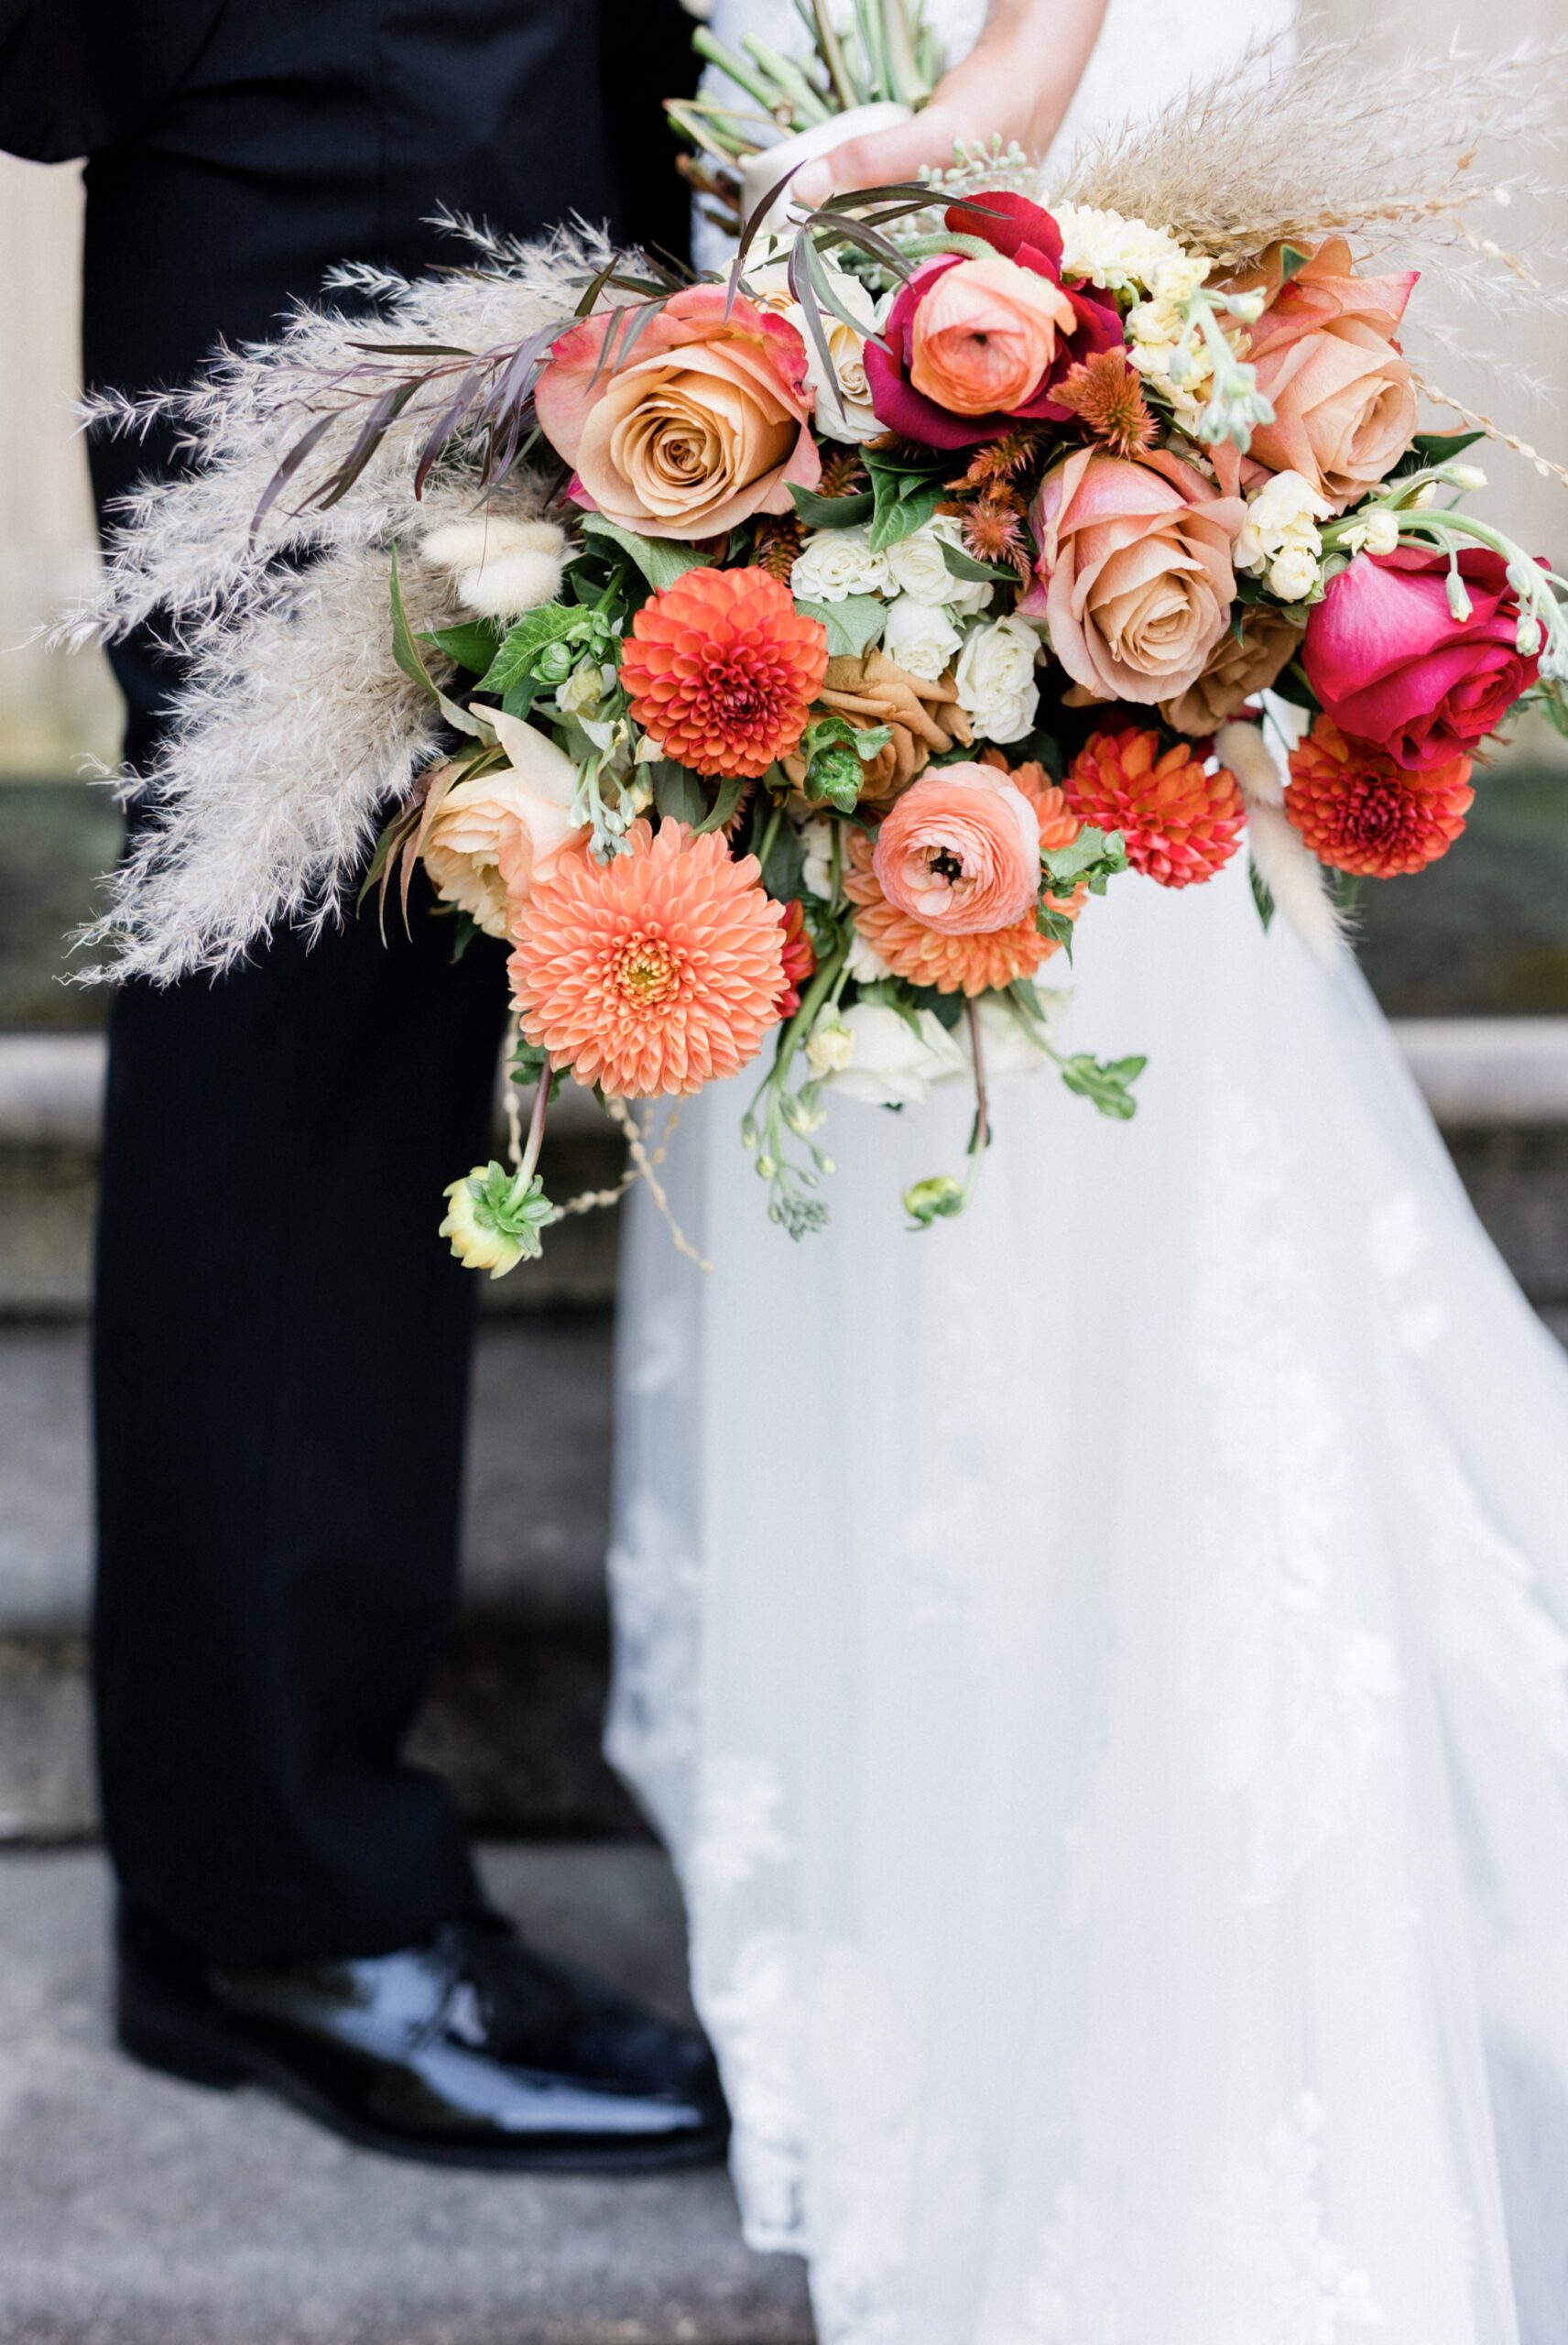 Closeup of bridal bouquet with roses, dahlias and ranunculus in shades of coral and pink framed with pampas grass with the bride and groom in the background photographed by Maria Silva Goyo Photography